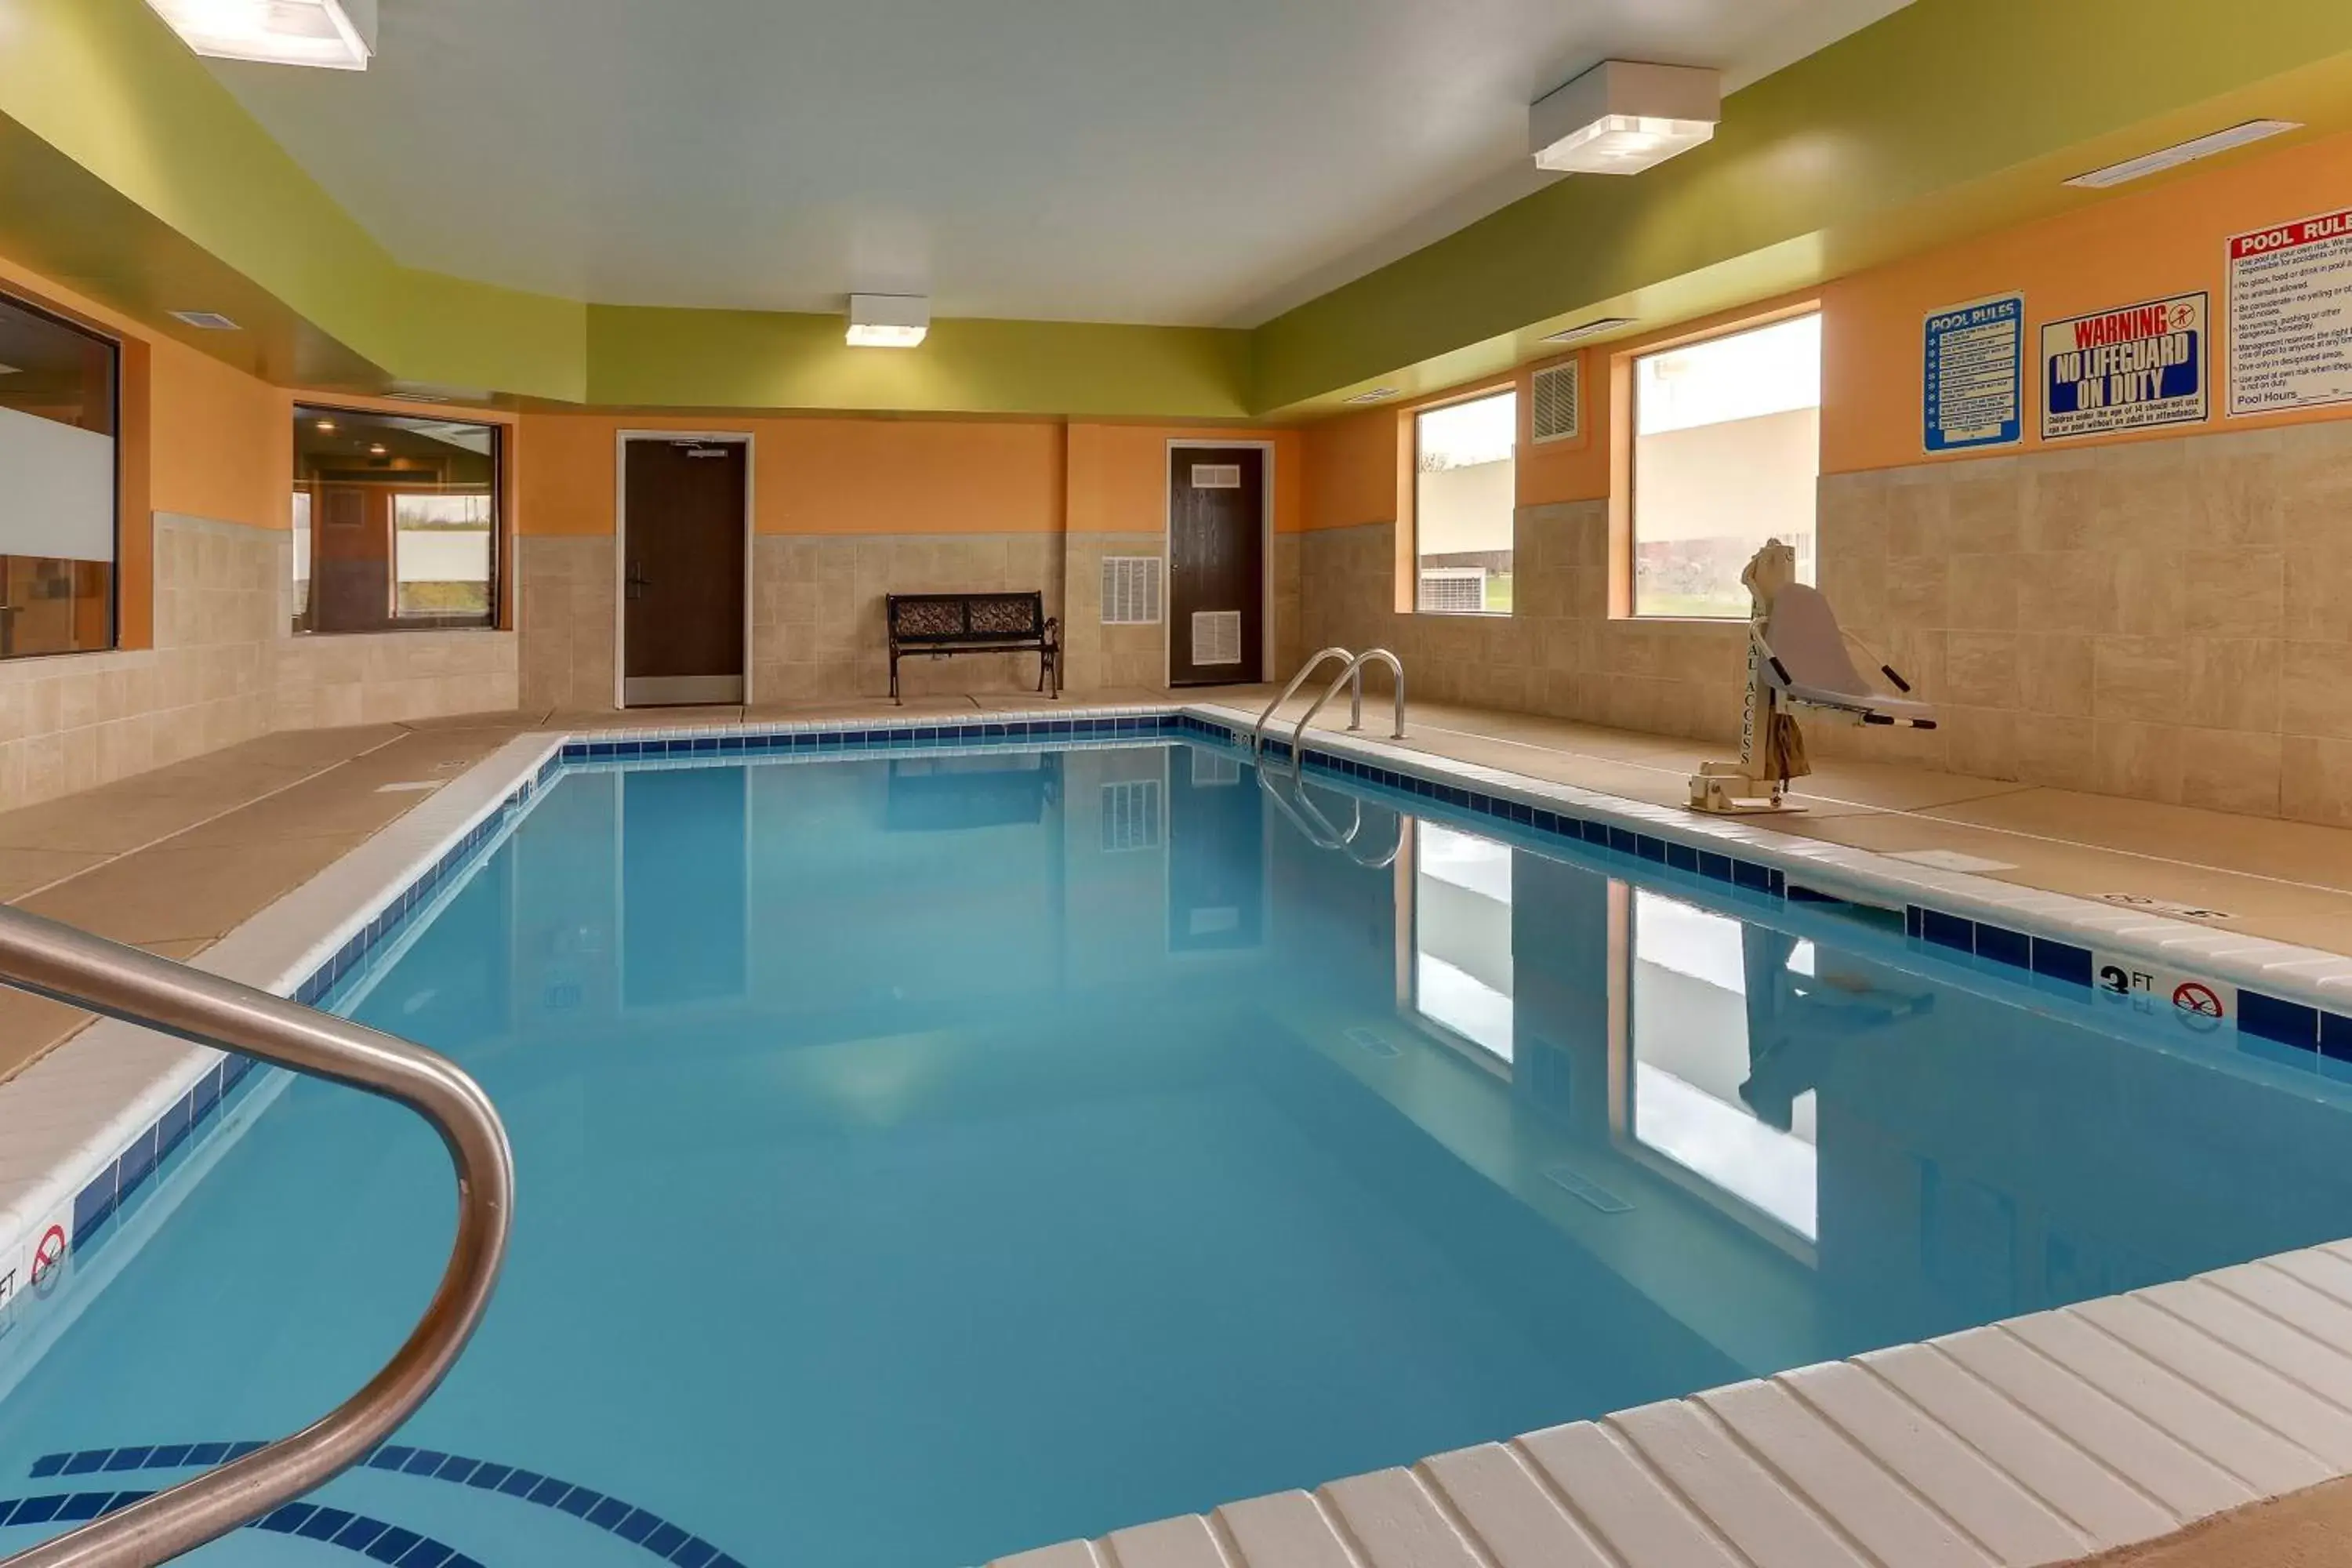 Swimming Pool in Red Roof Inn Springfield, OH